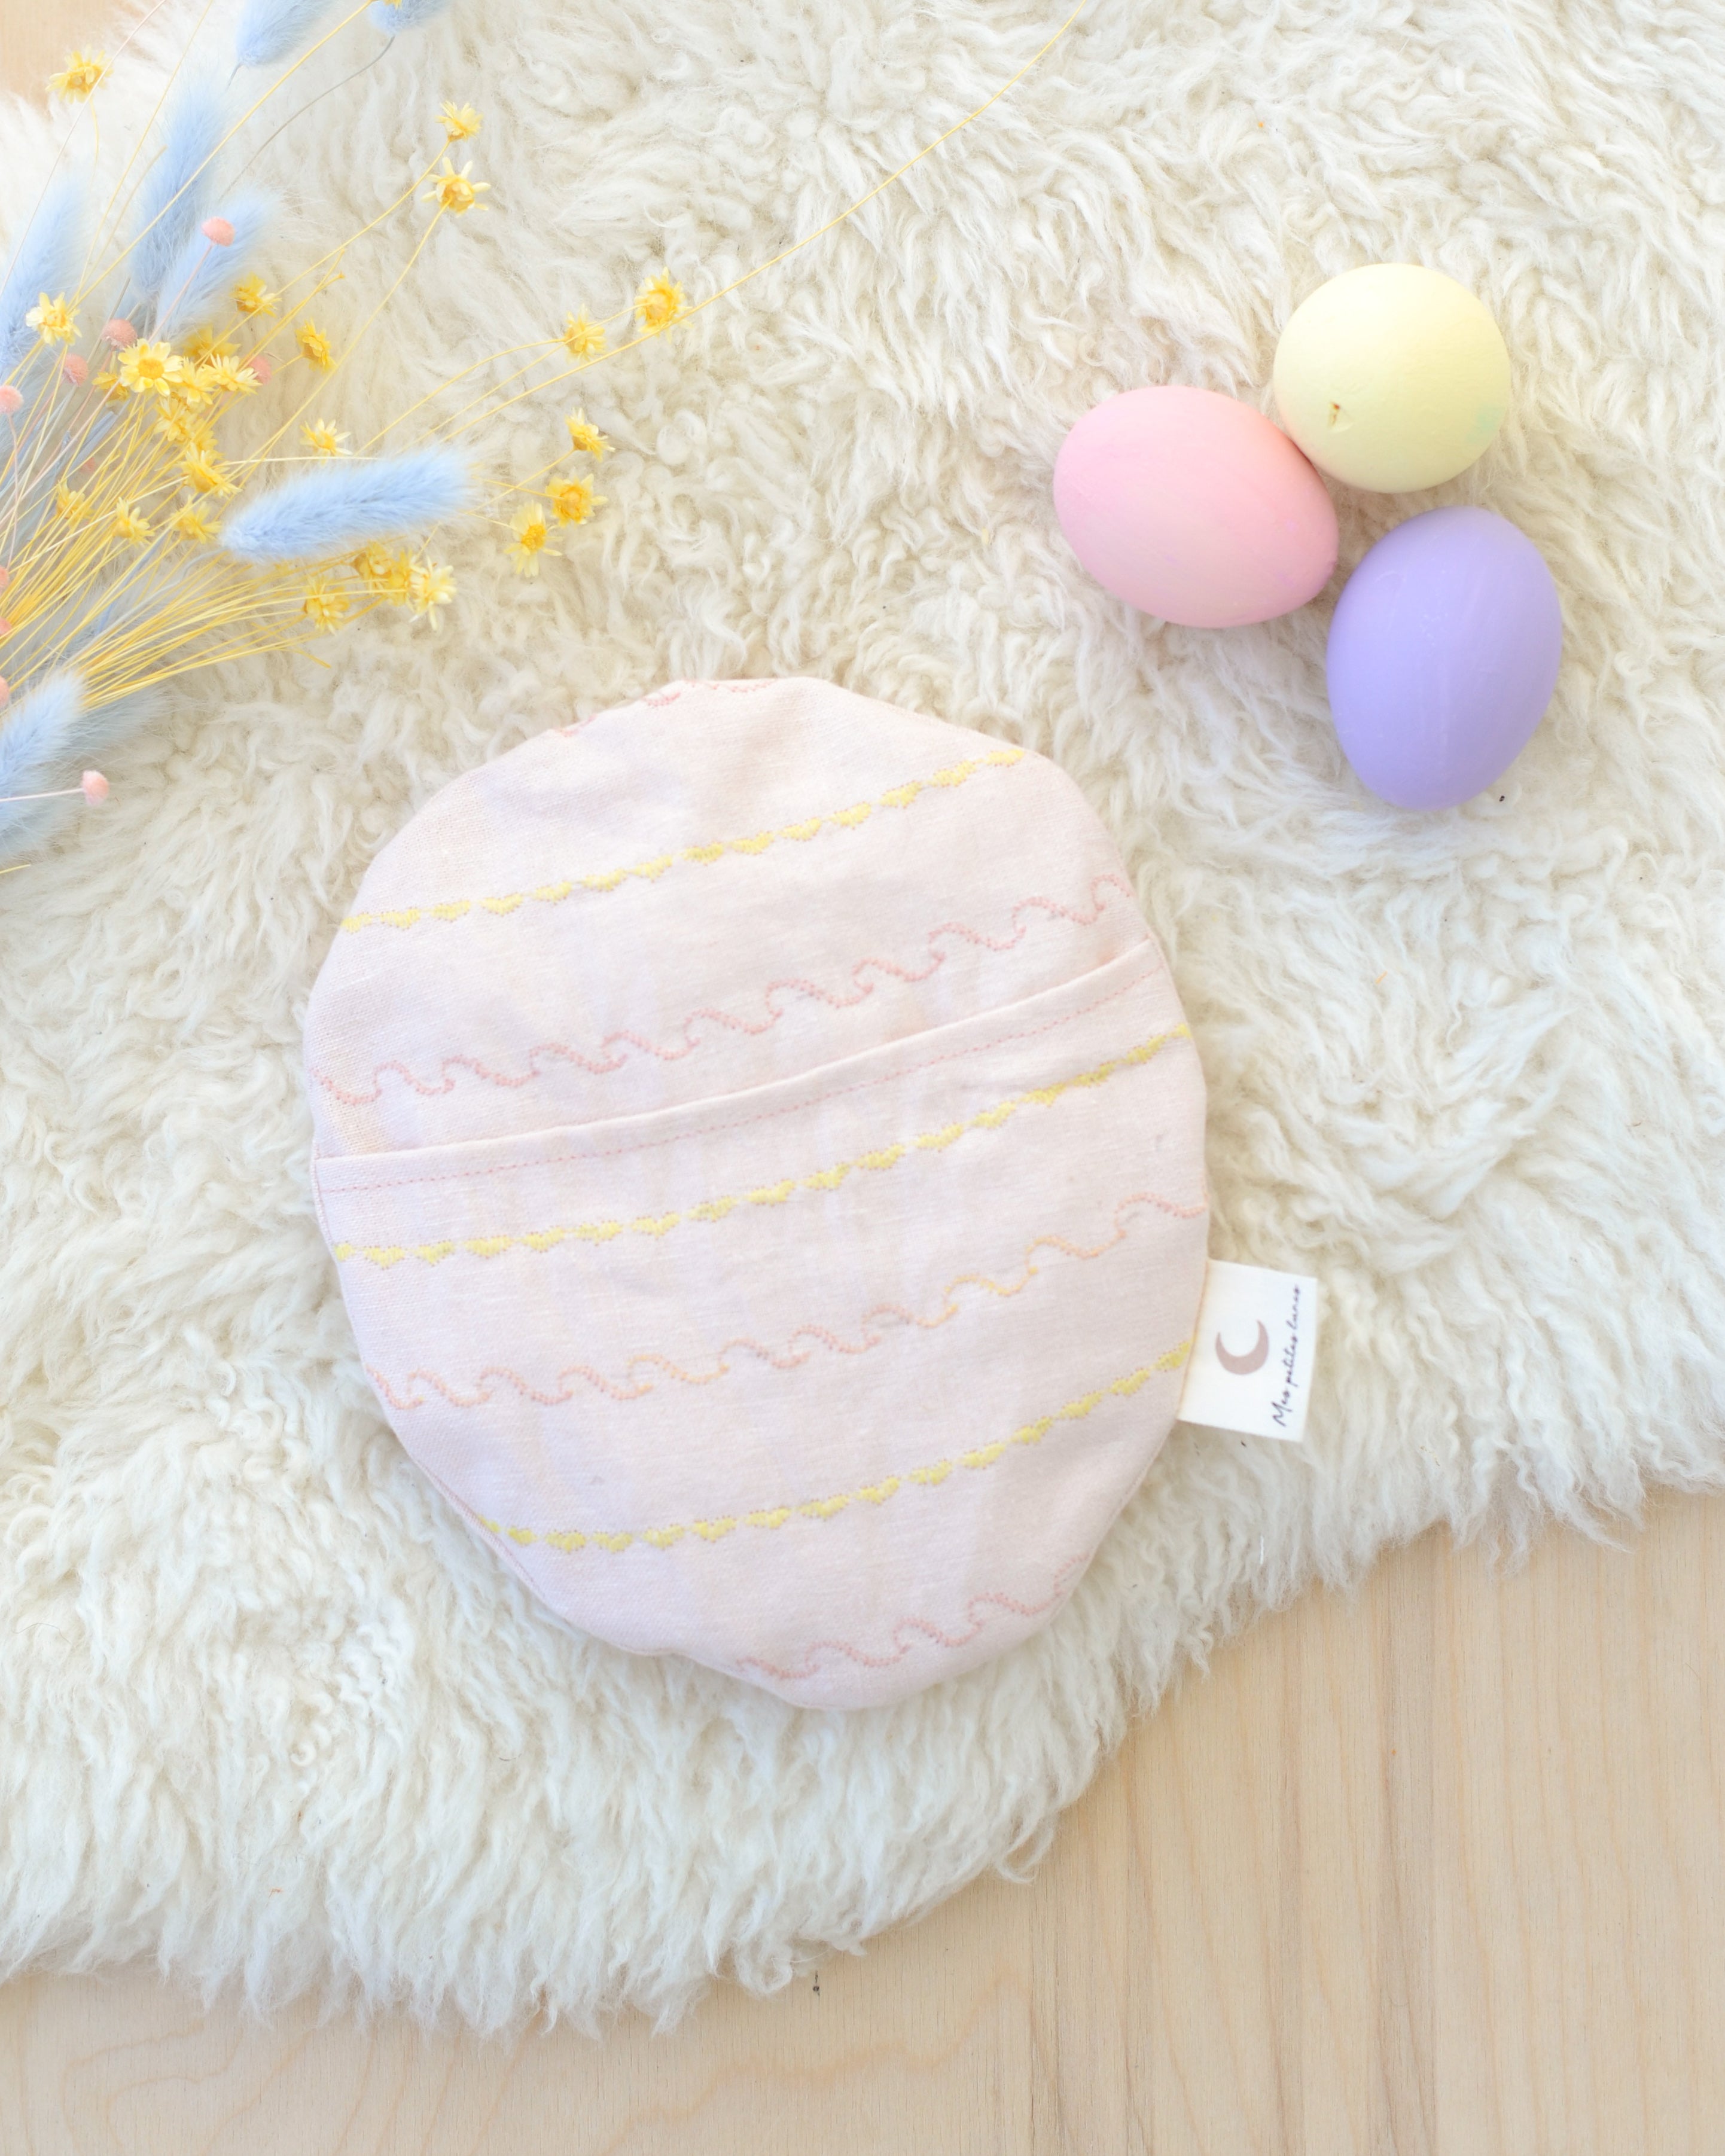 Mini Chick and Easter Egg-shaped Bed